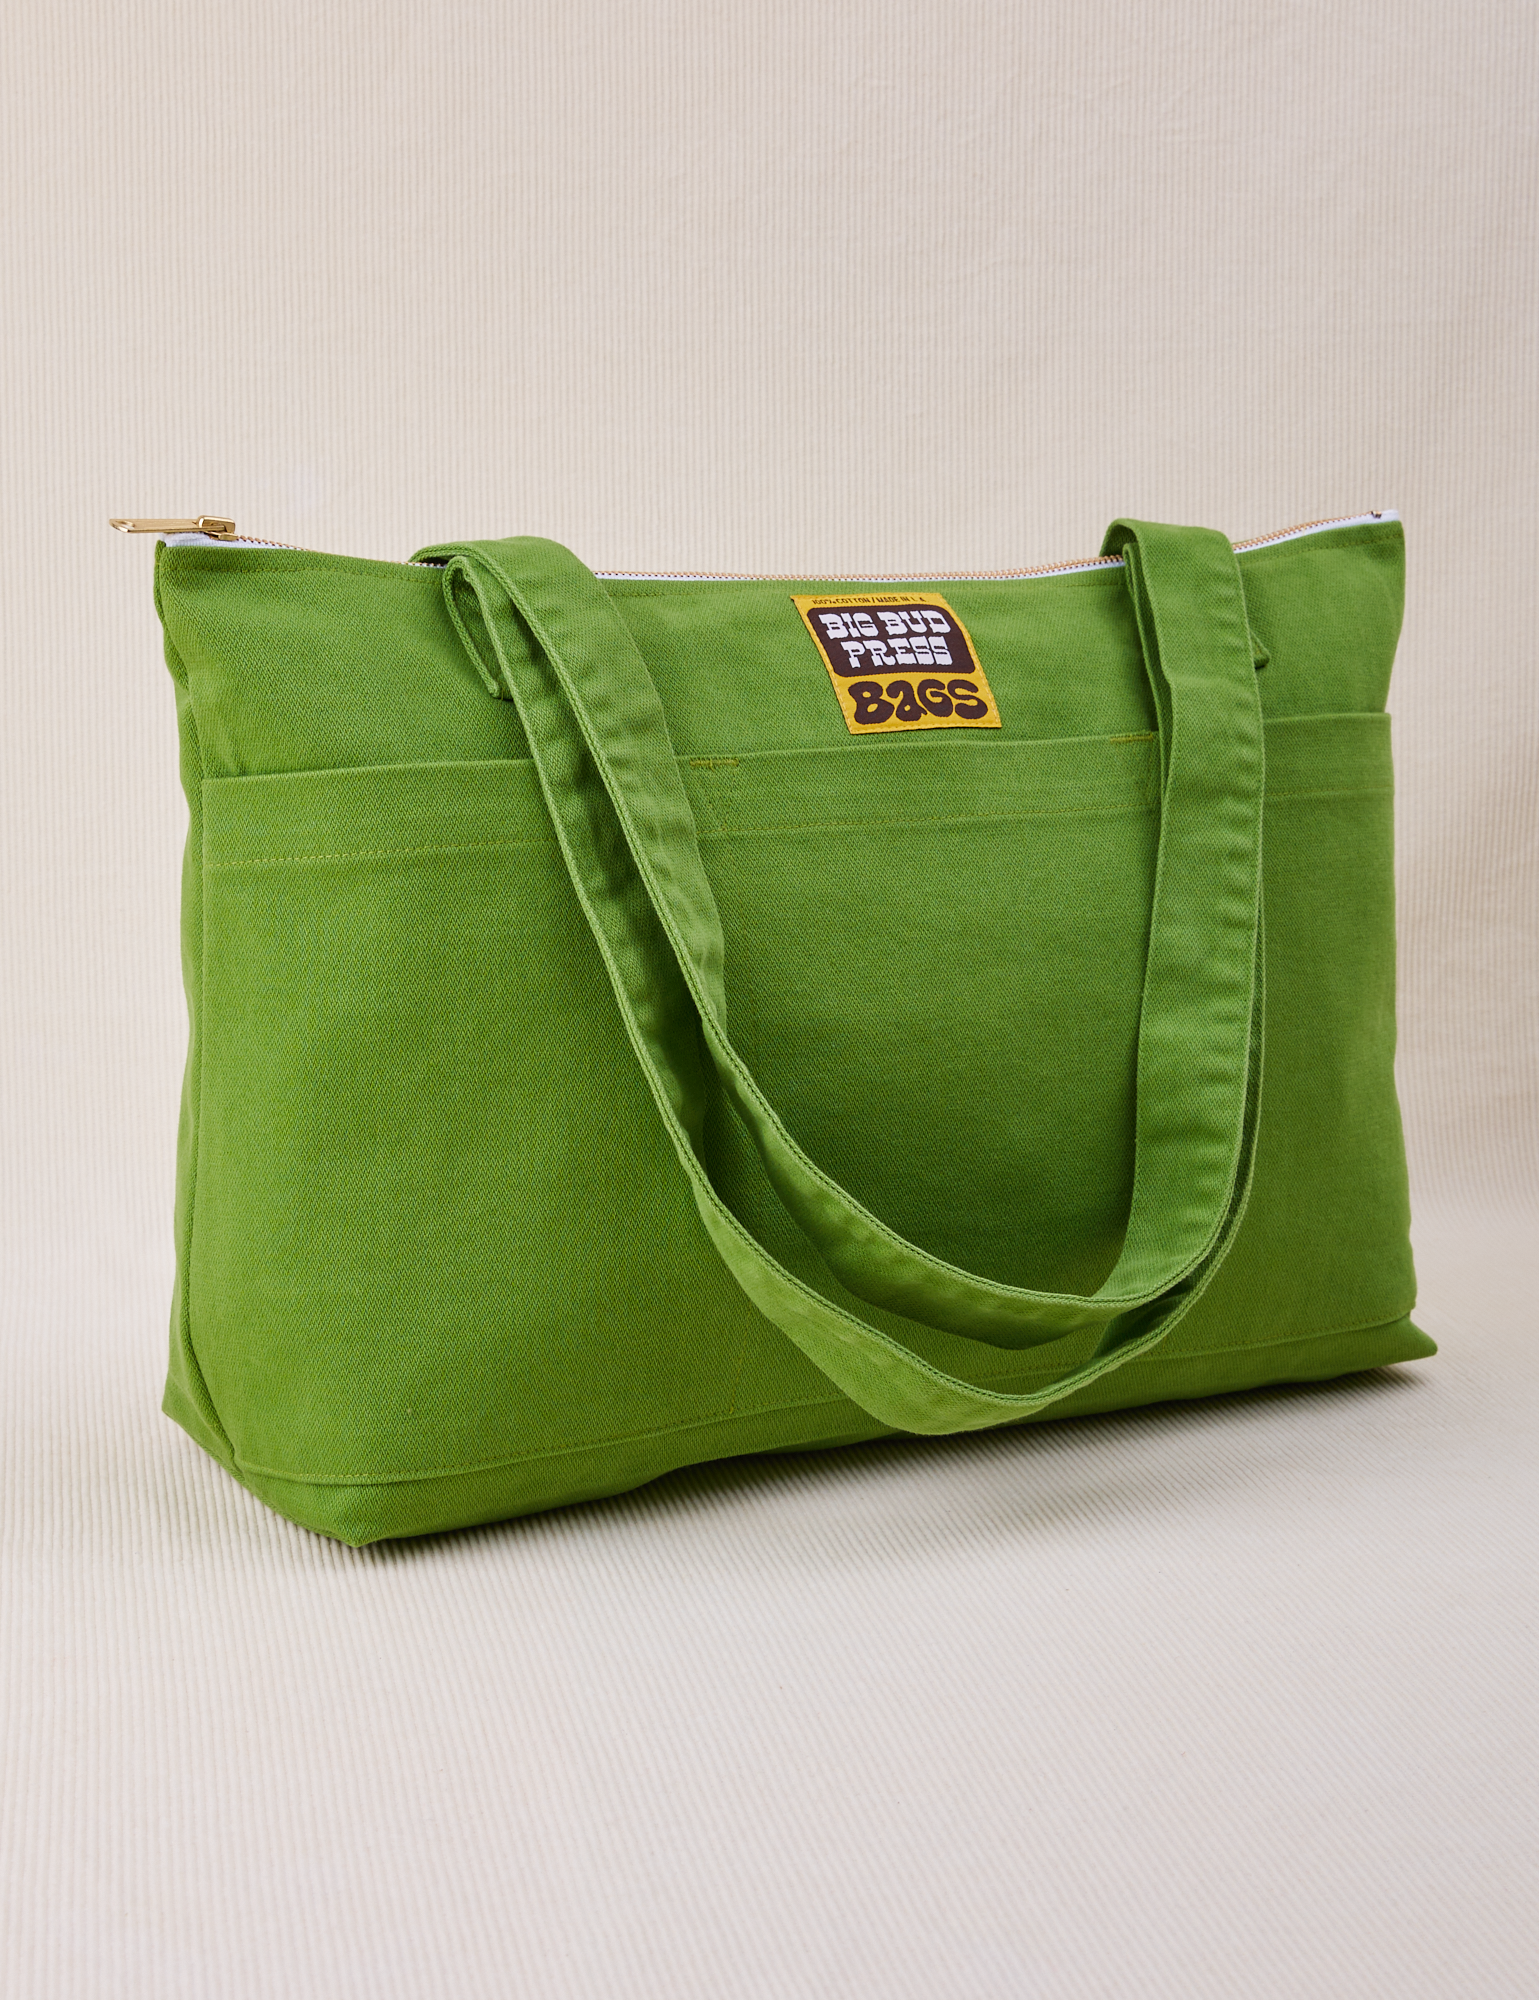 XL Zip Tote in Bright Olive